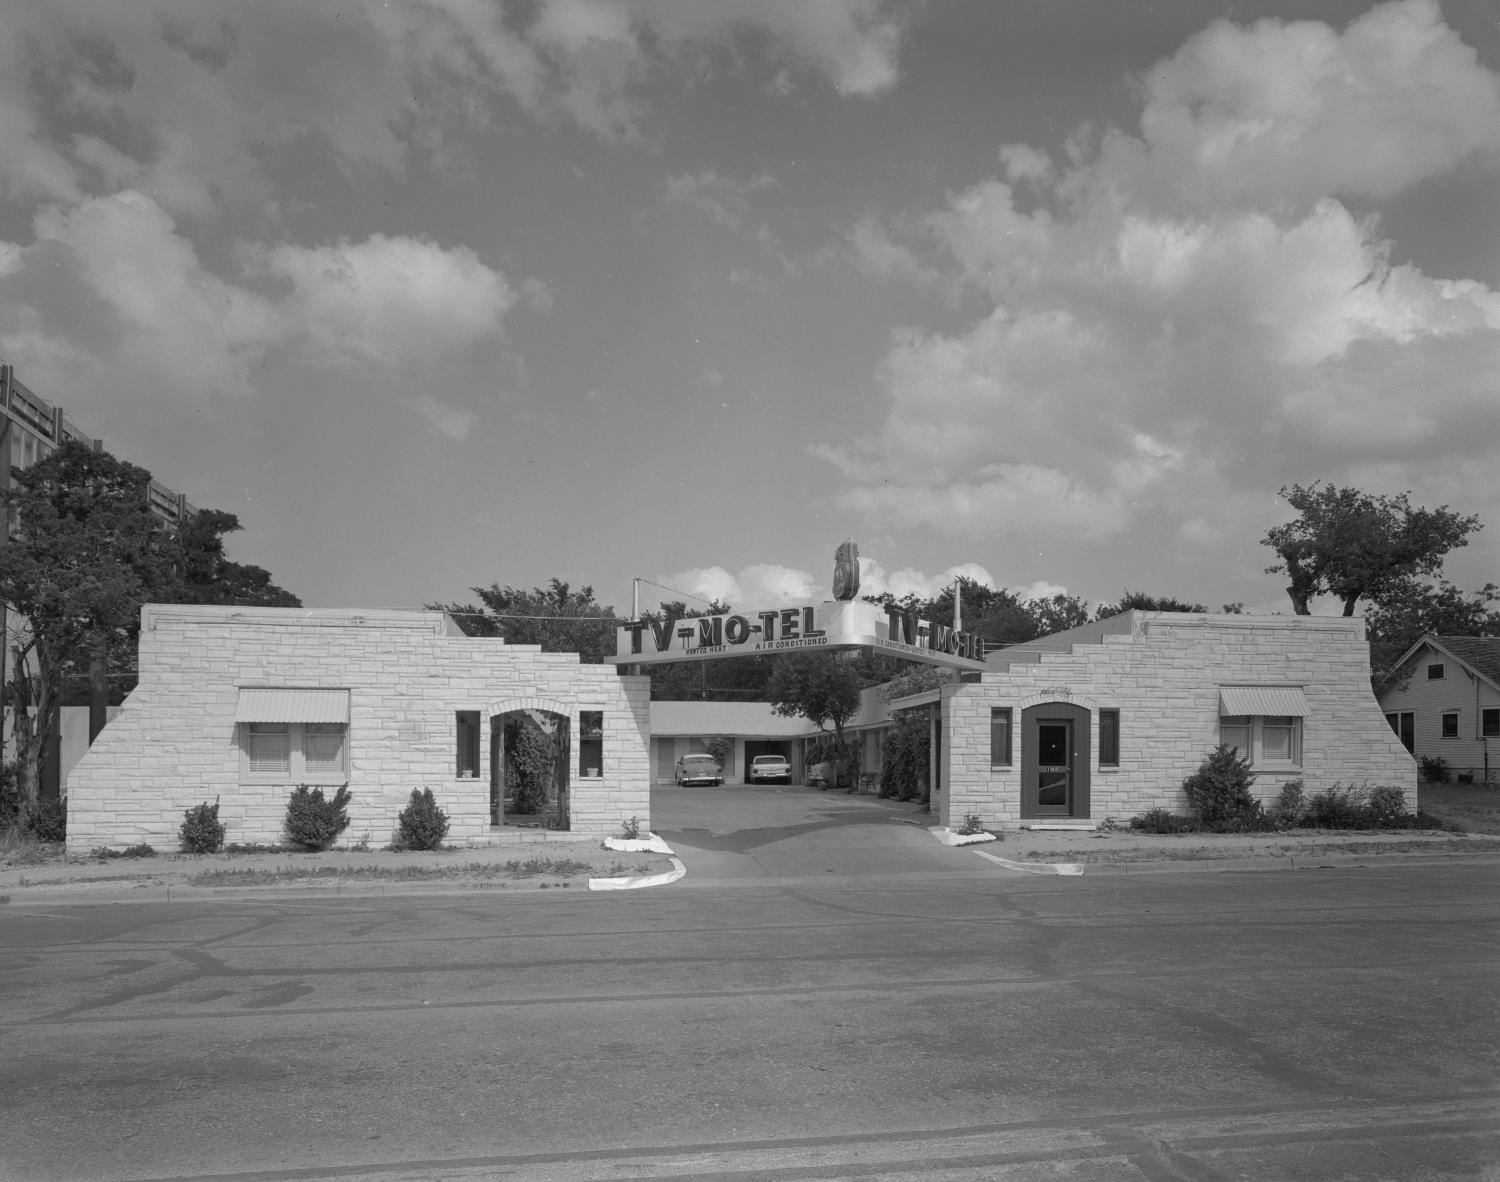 The TV Motel, located at 1905 South Congress Avenue, Austin, 1961